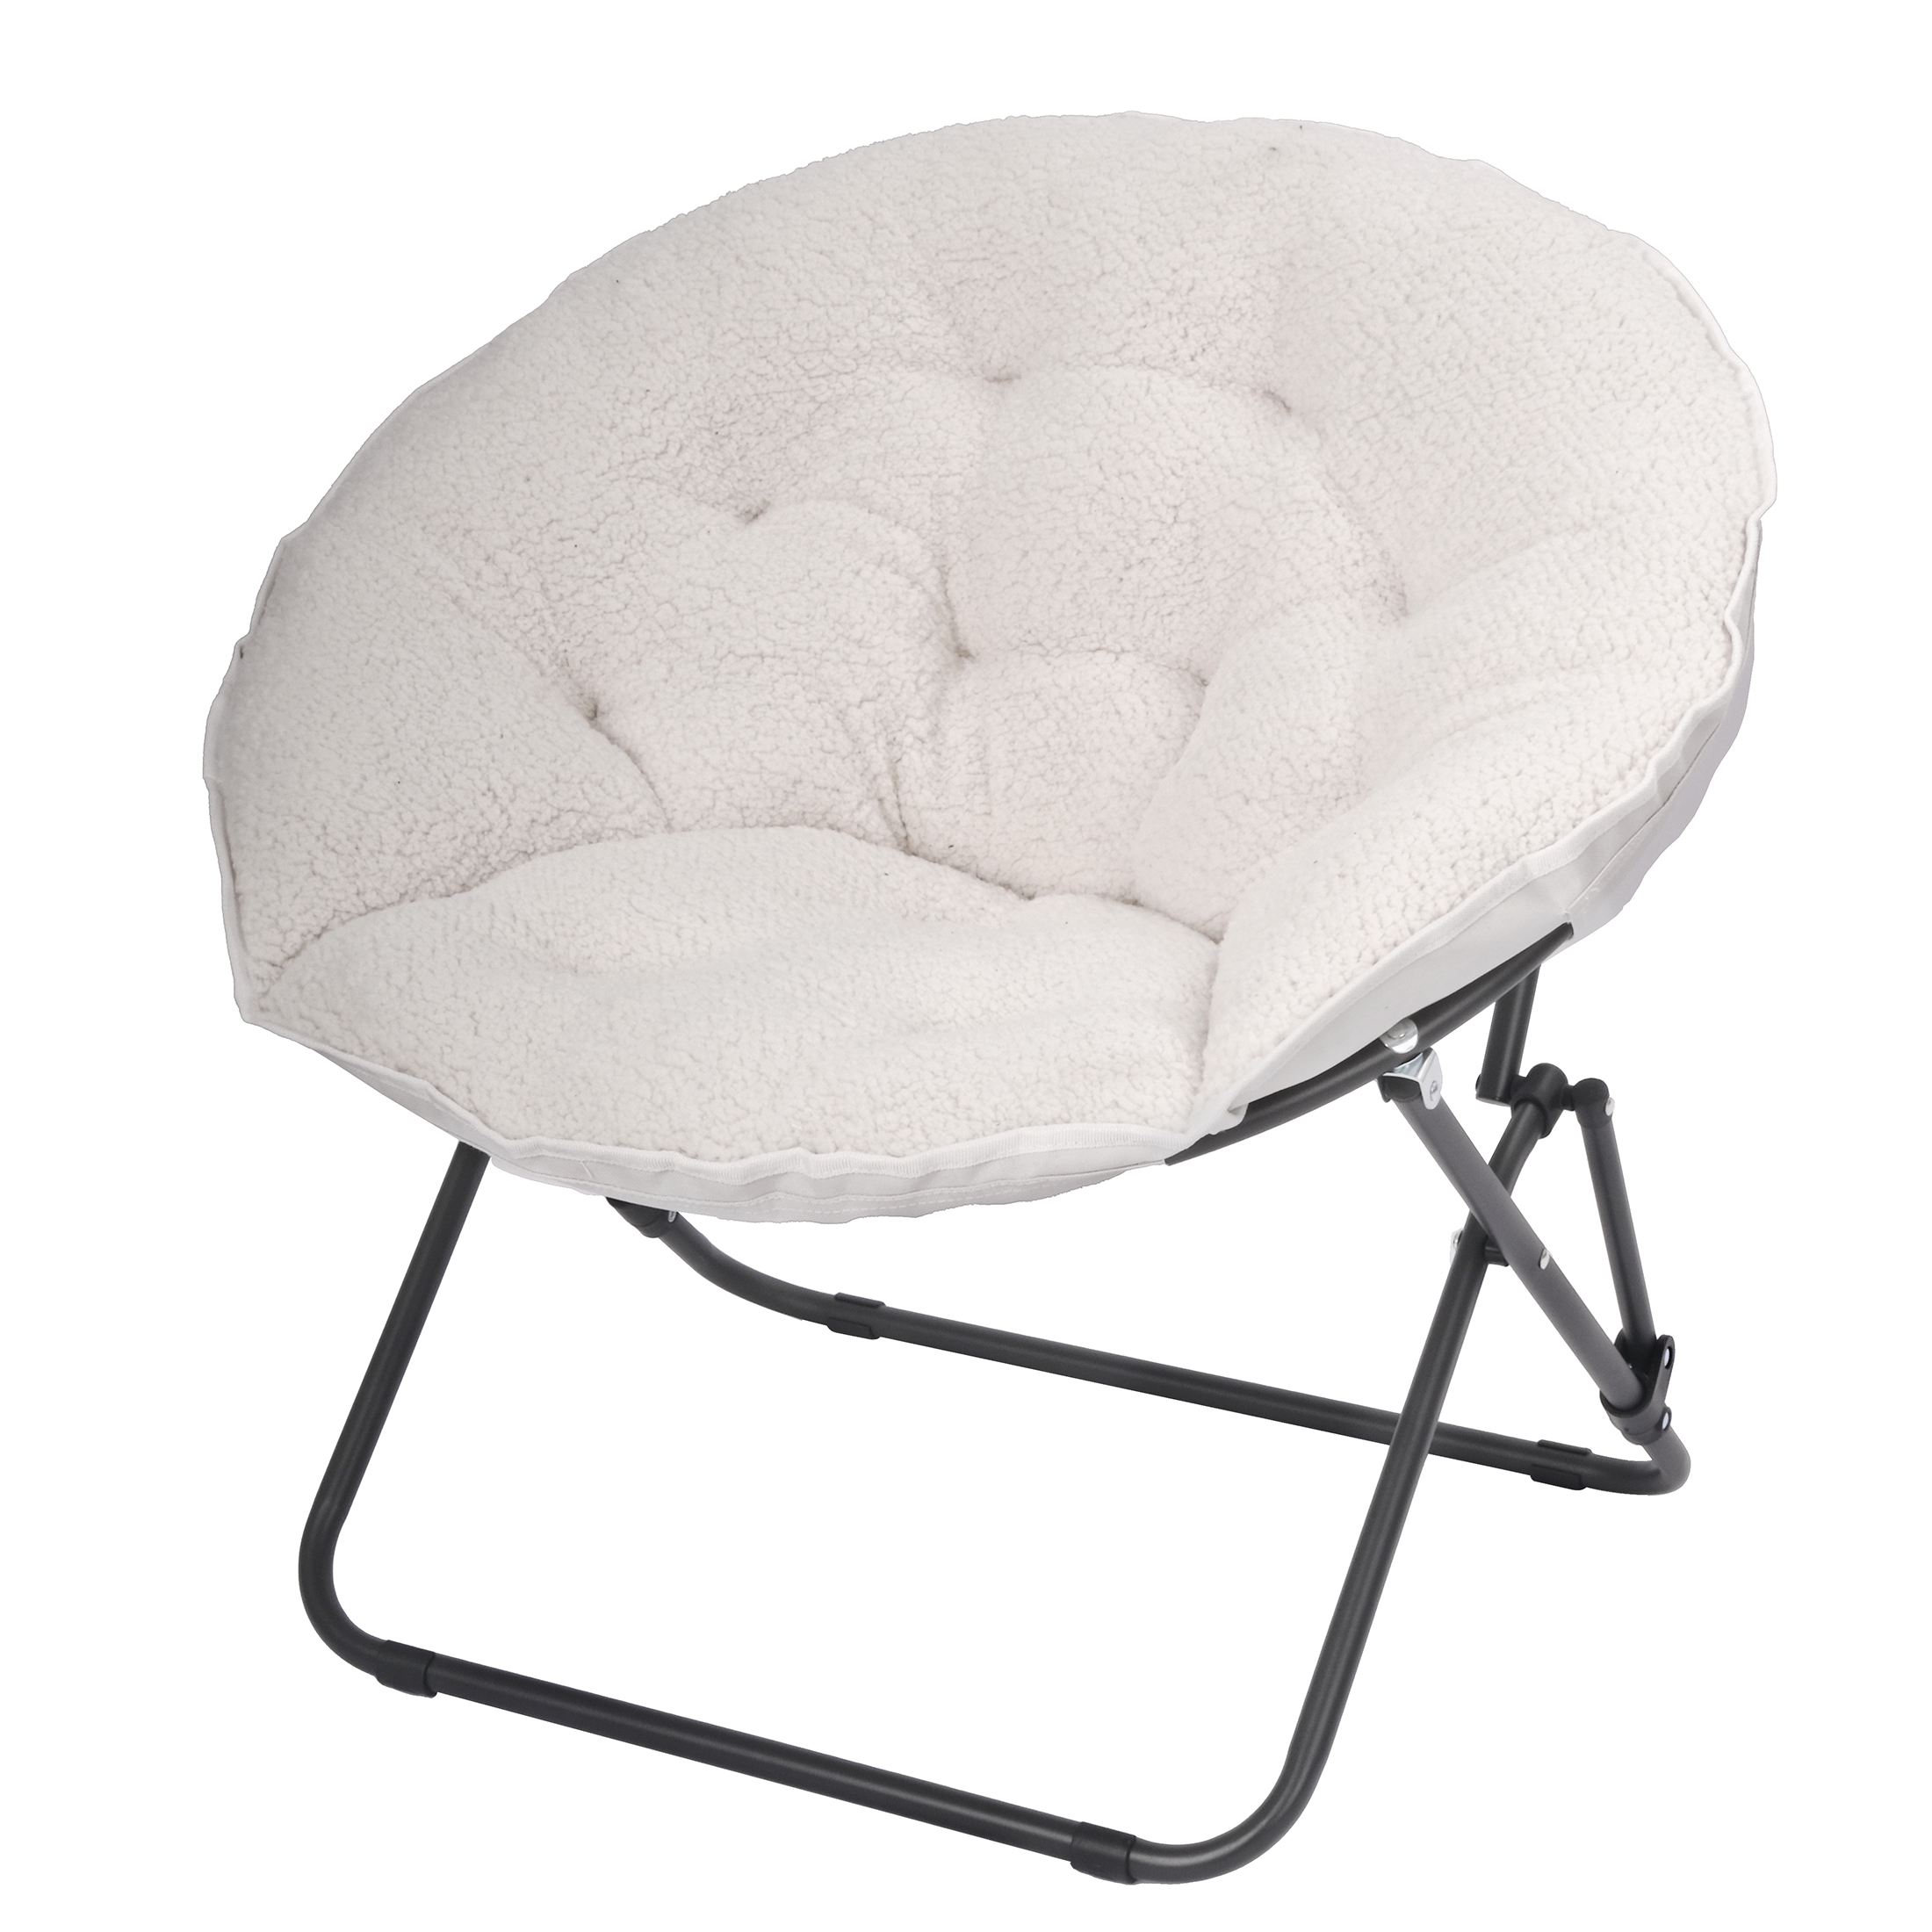 Mainstays Saucer Chair for Kids and Teens, White Faux Shearling - image 4 of 7